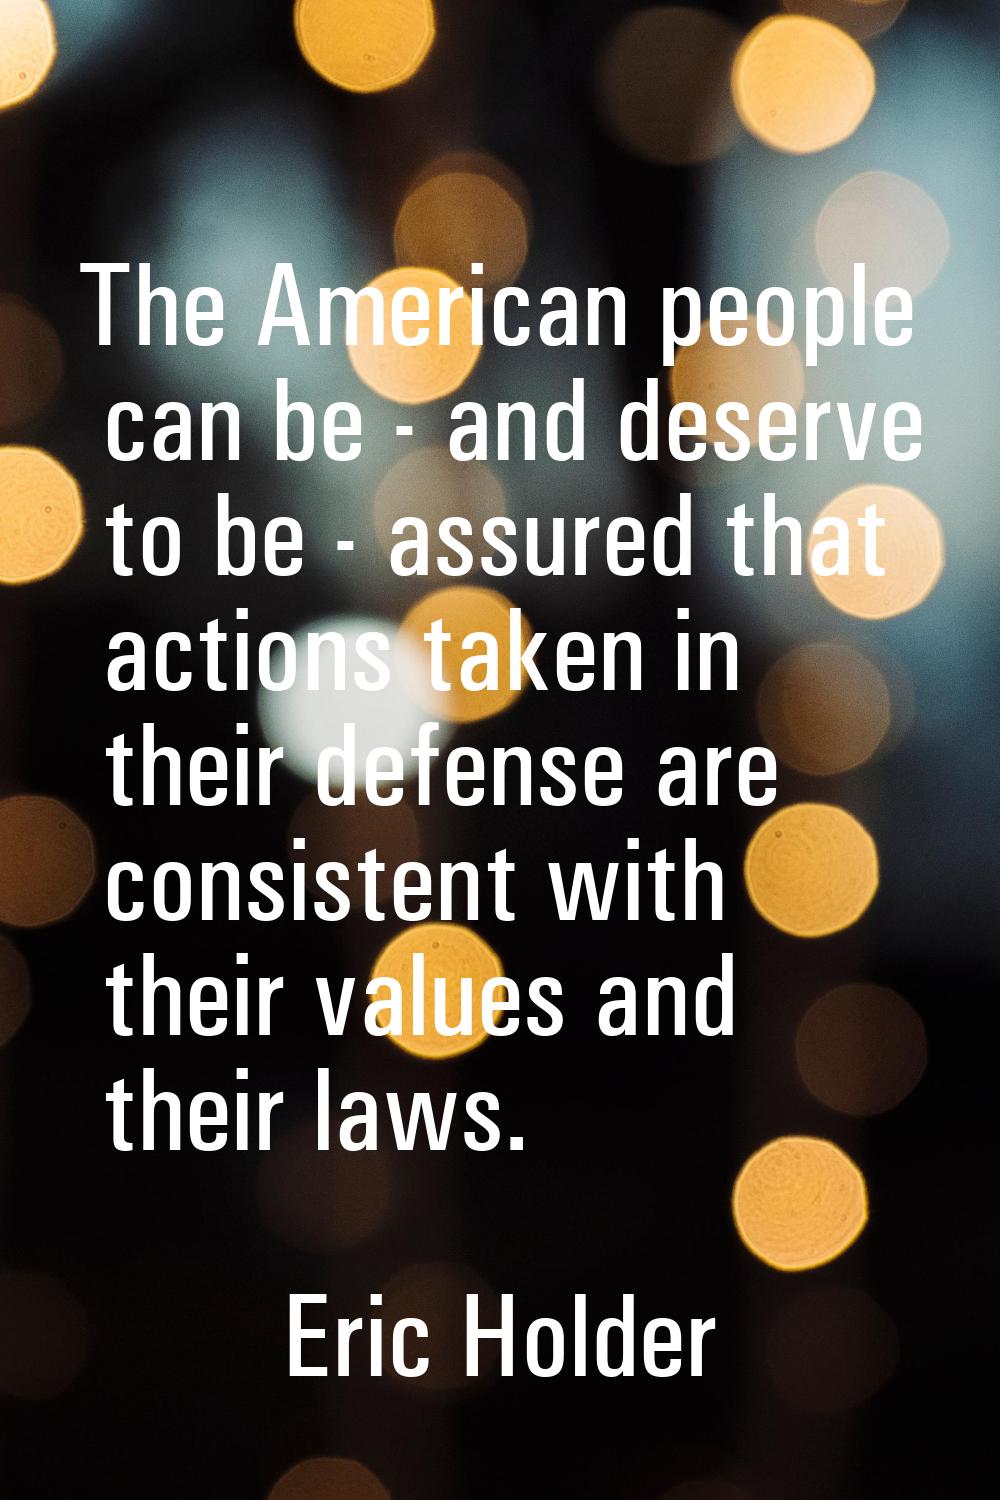 The American people can be - and deserve to be - assured that actions taken in their defense are co